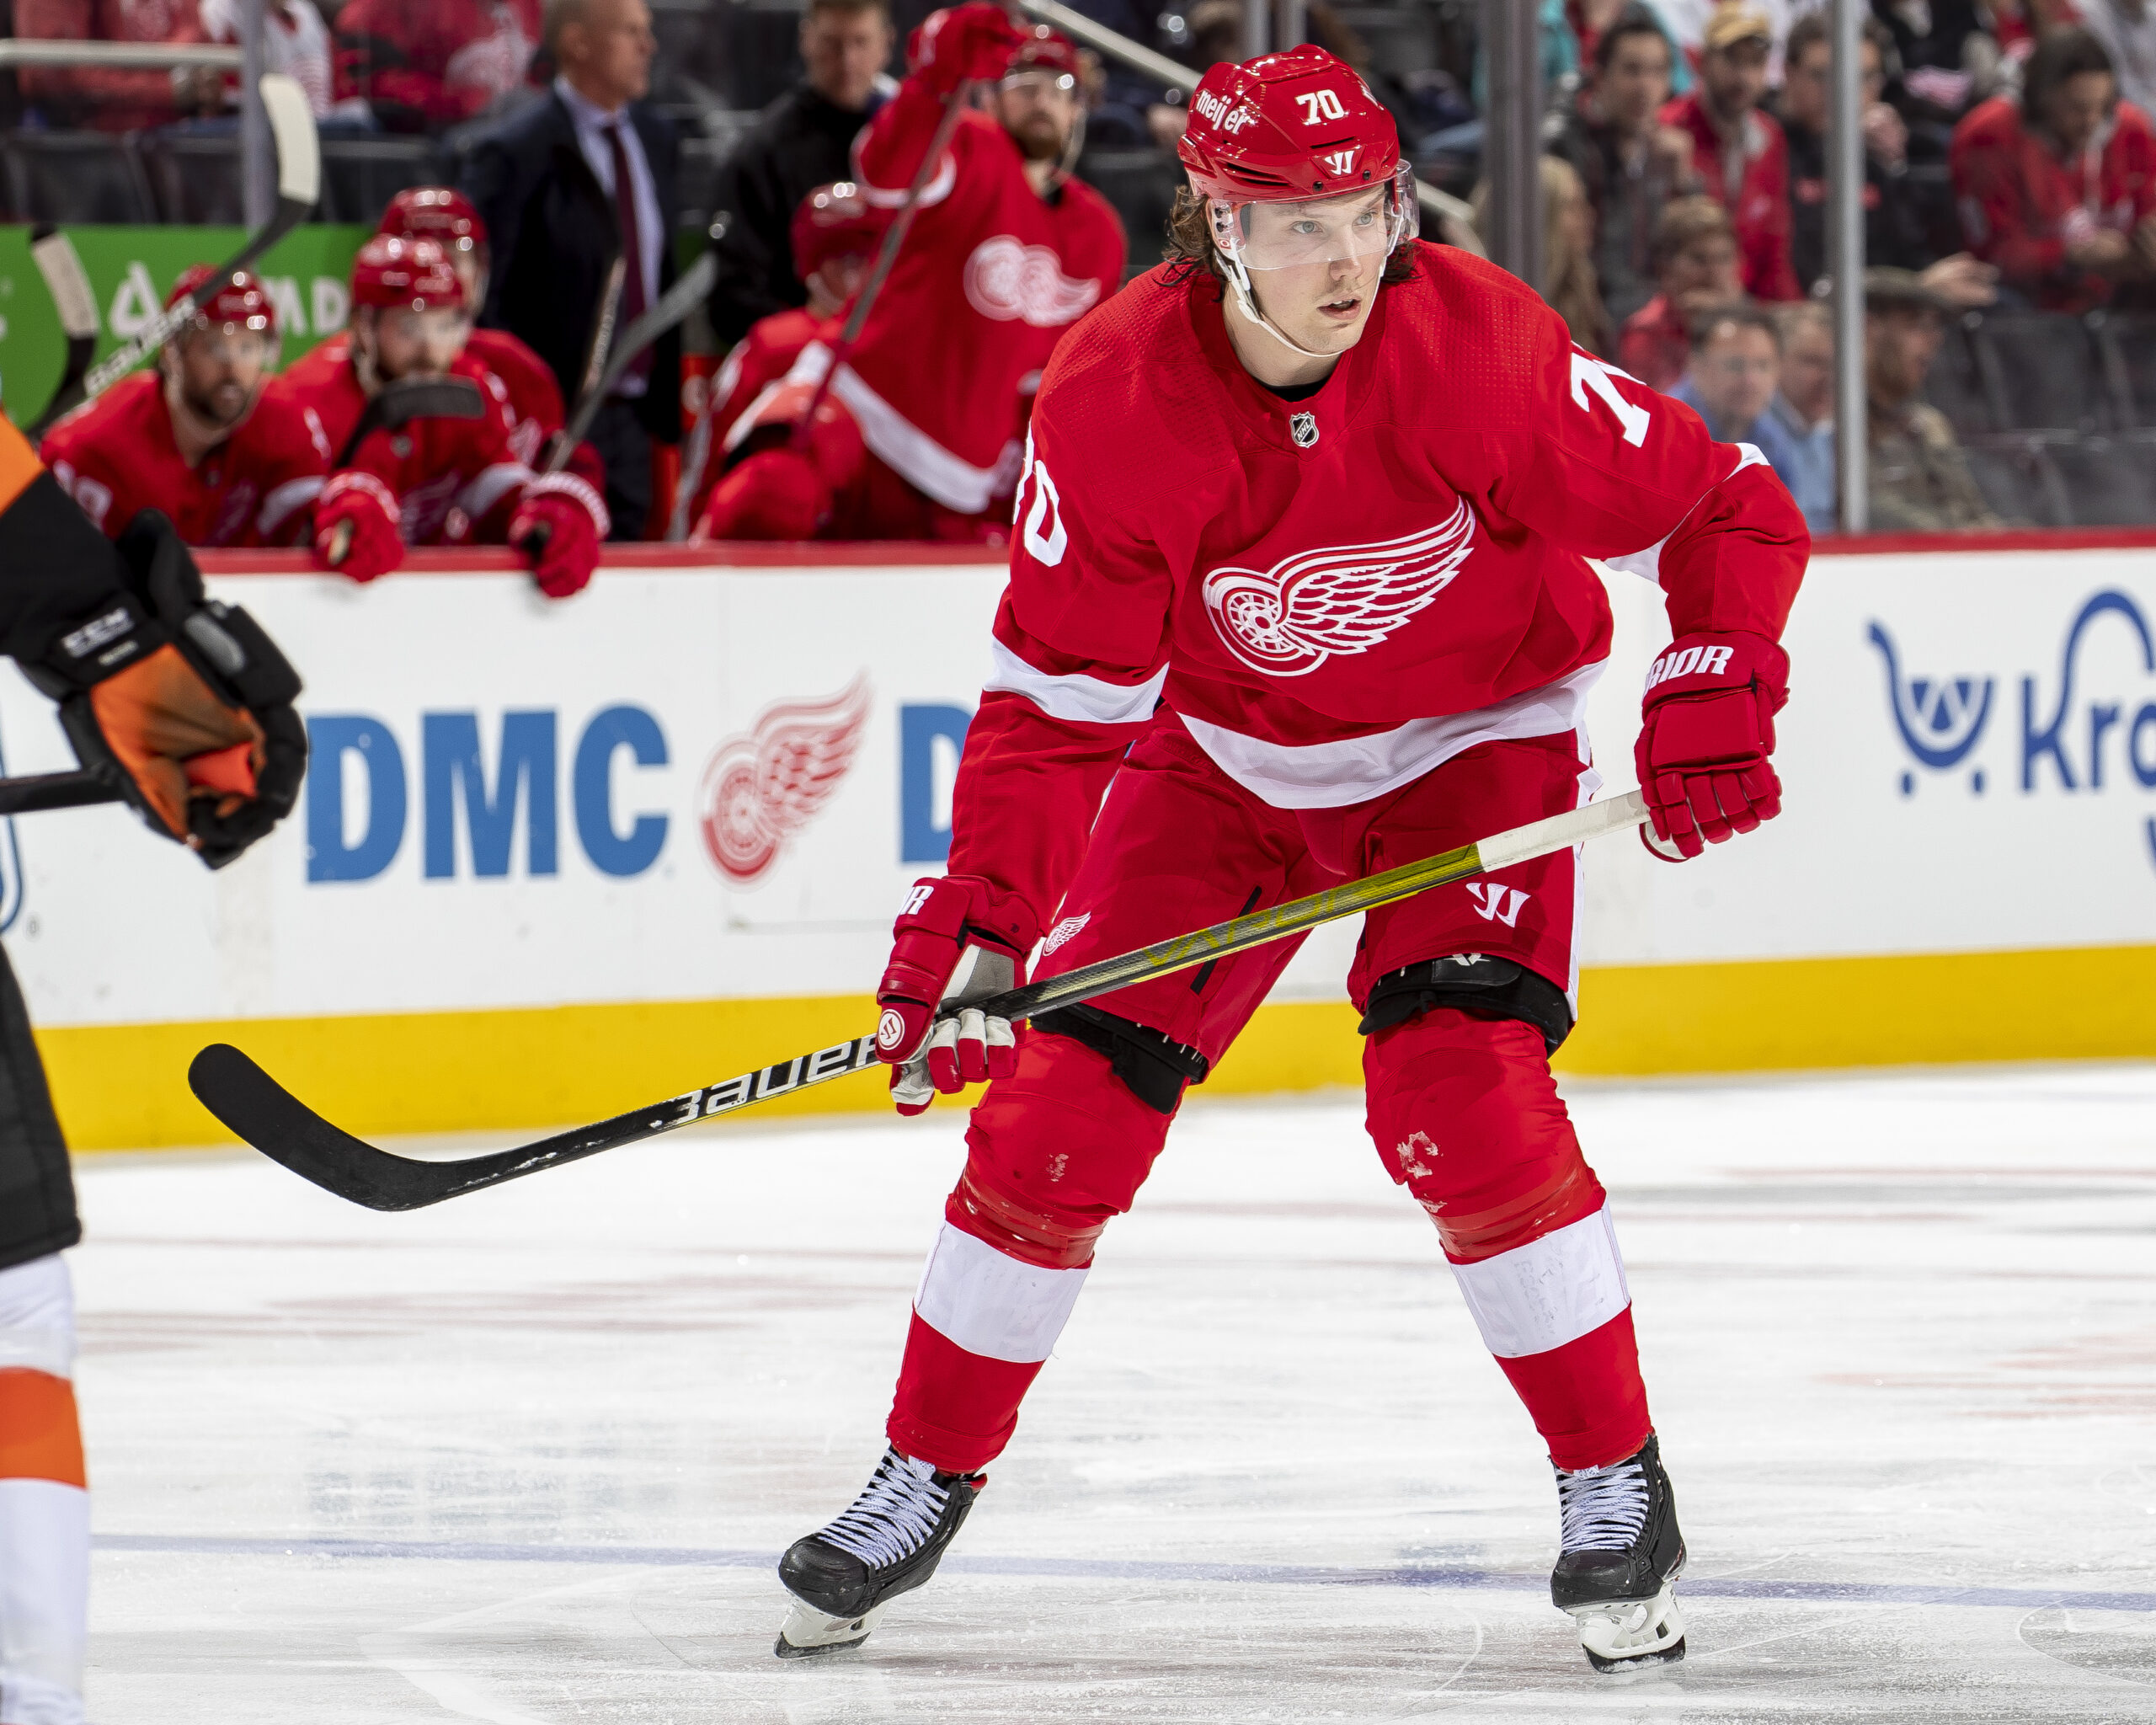 Sundqvist and Walman are no-downside bets for the Red Wings - WingsNation